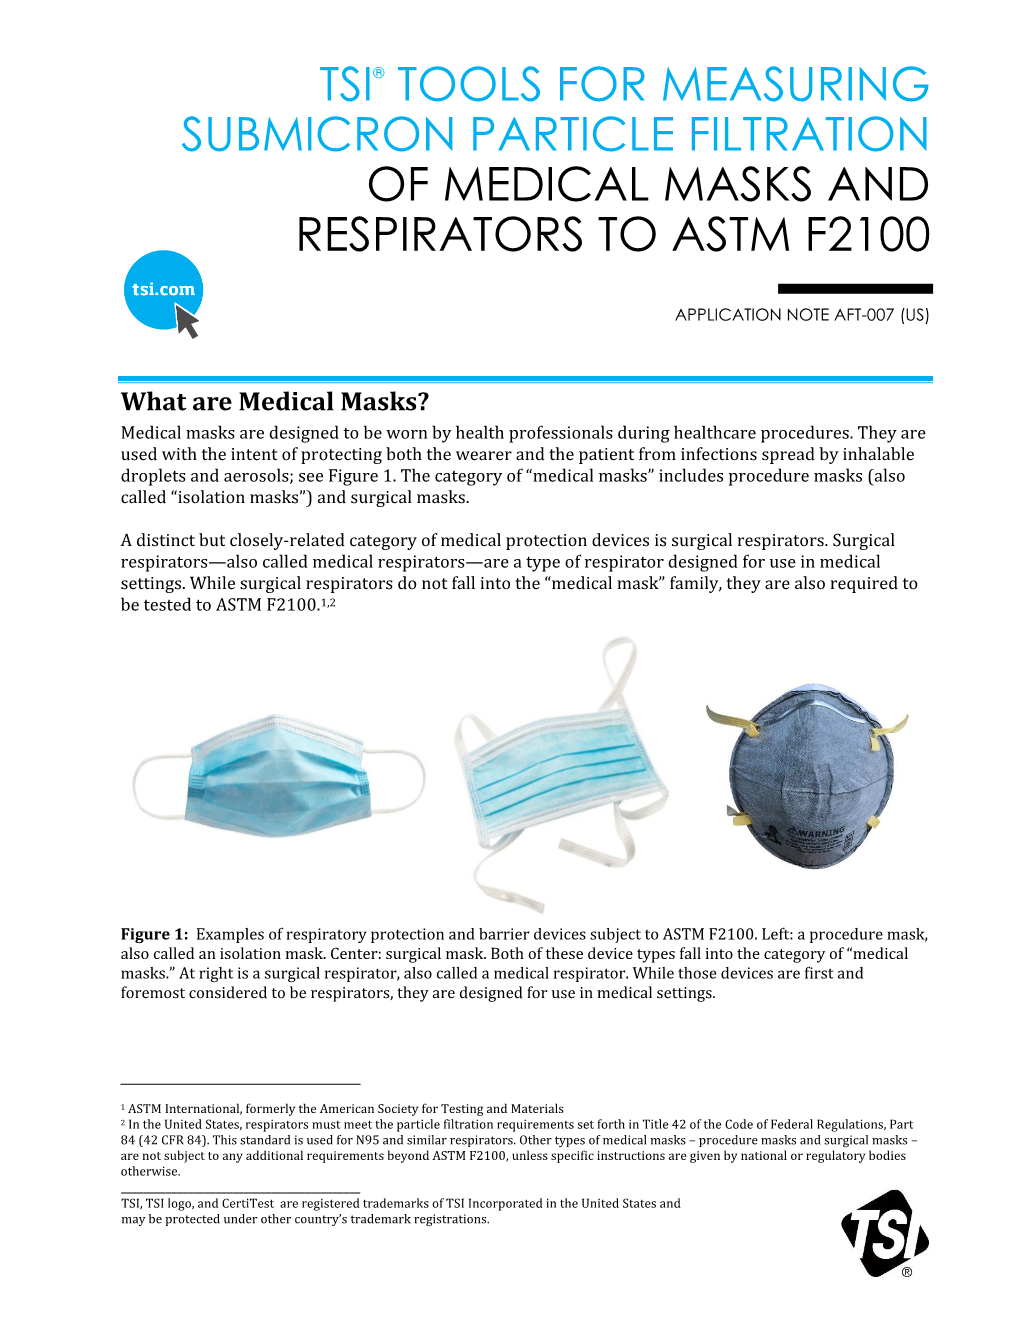 TSI Tools for Measuring Submicron Particle Filtration of Medical Masks